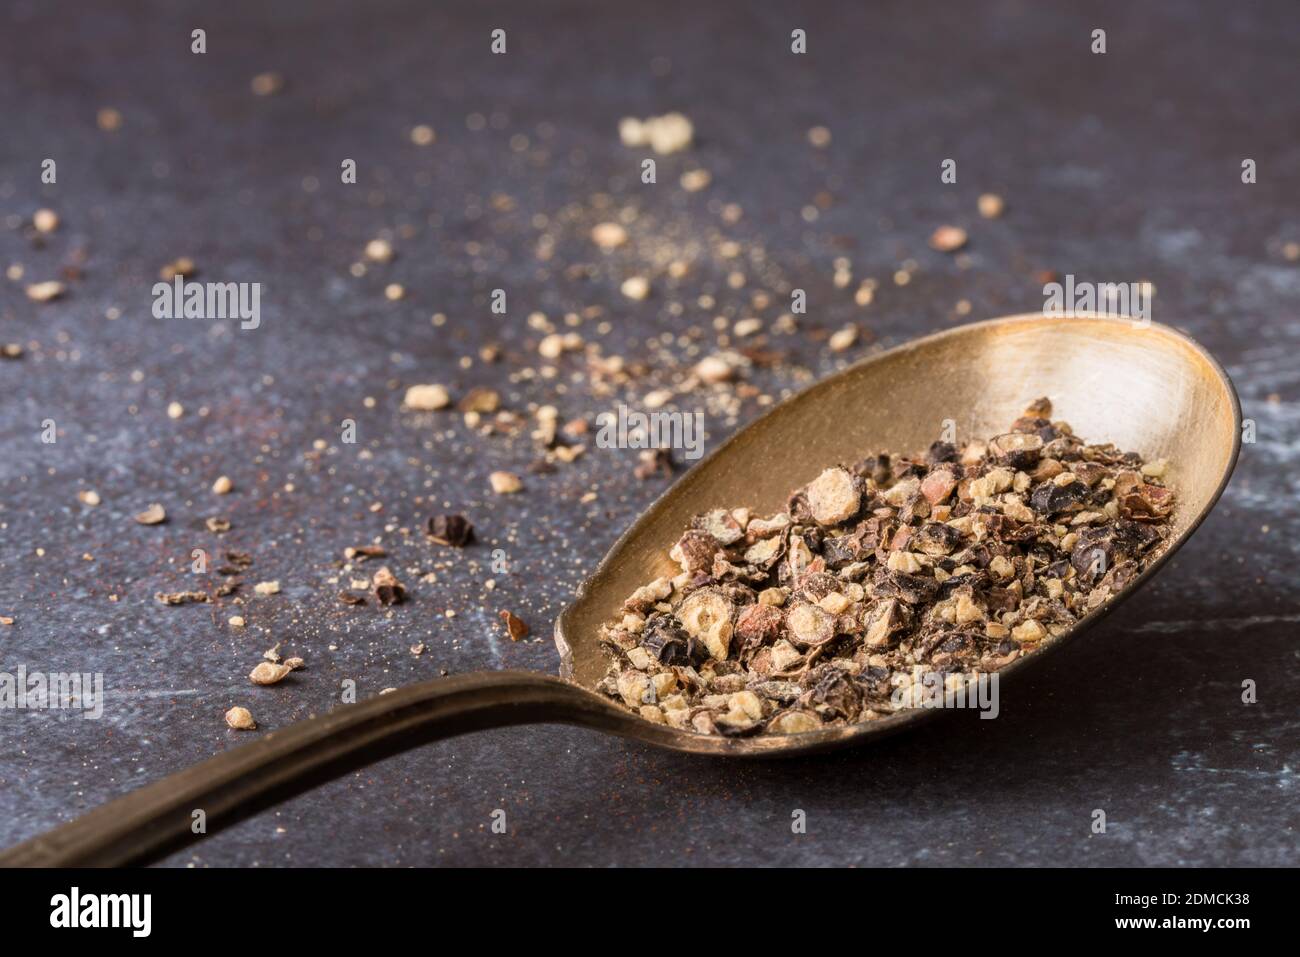 Close-up Of Seasoning In Spoon On Table Stock Photo